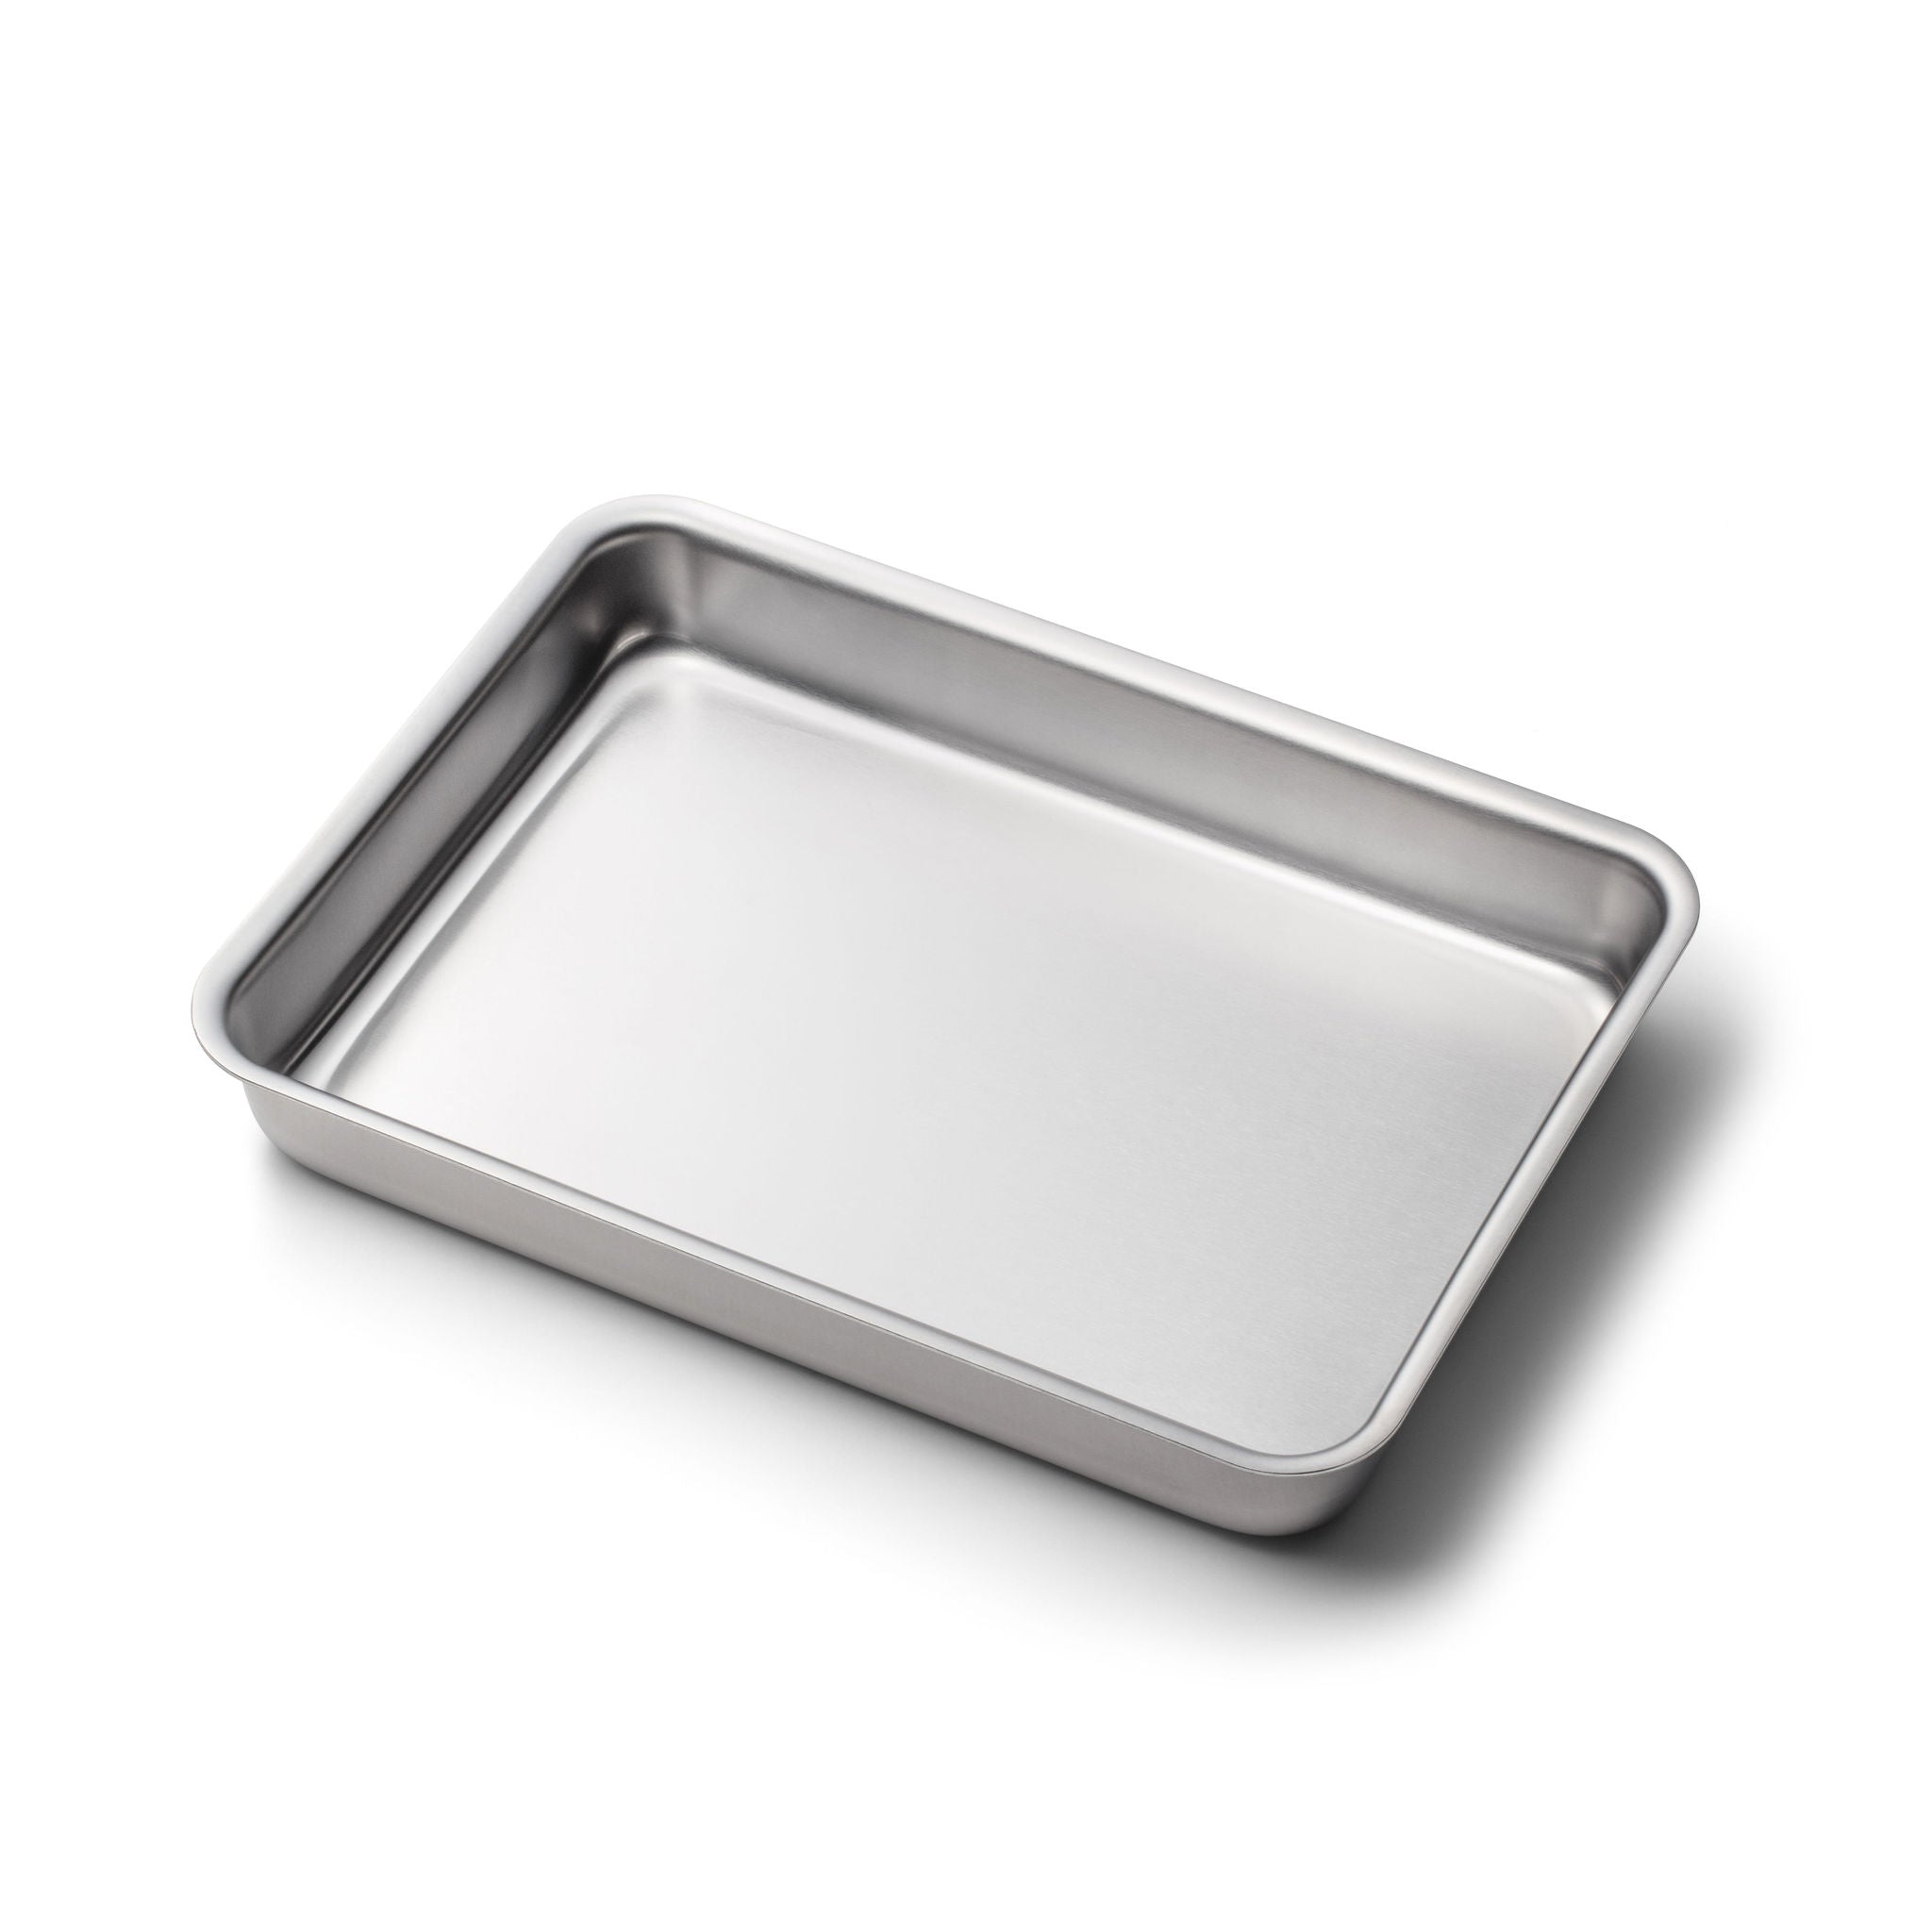 OVENTE Kitchen Oven Roasting Pan 13 x 9.4 Inch Stainless Steel Portable  Baking Tray with Rack